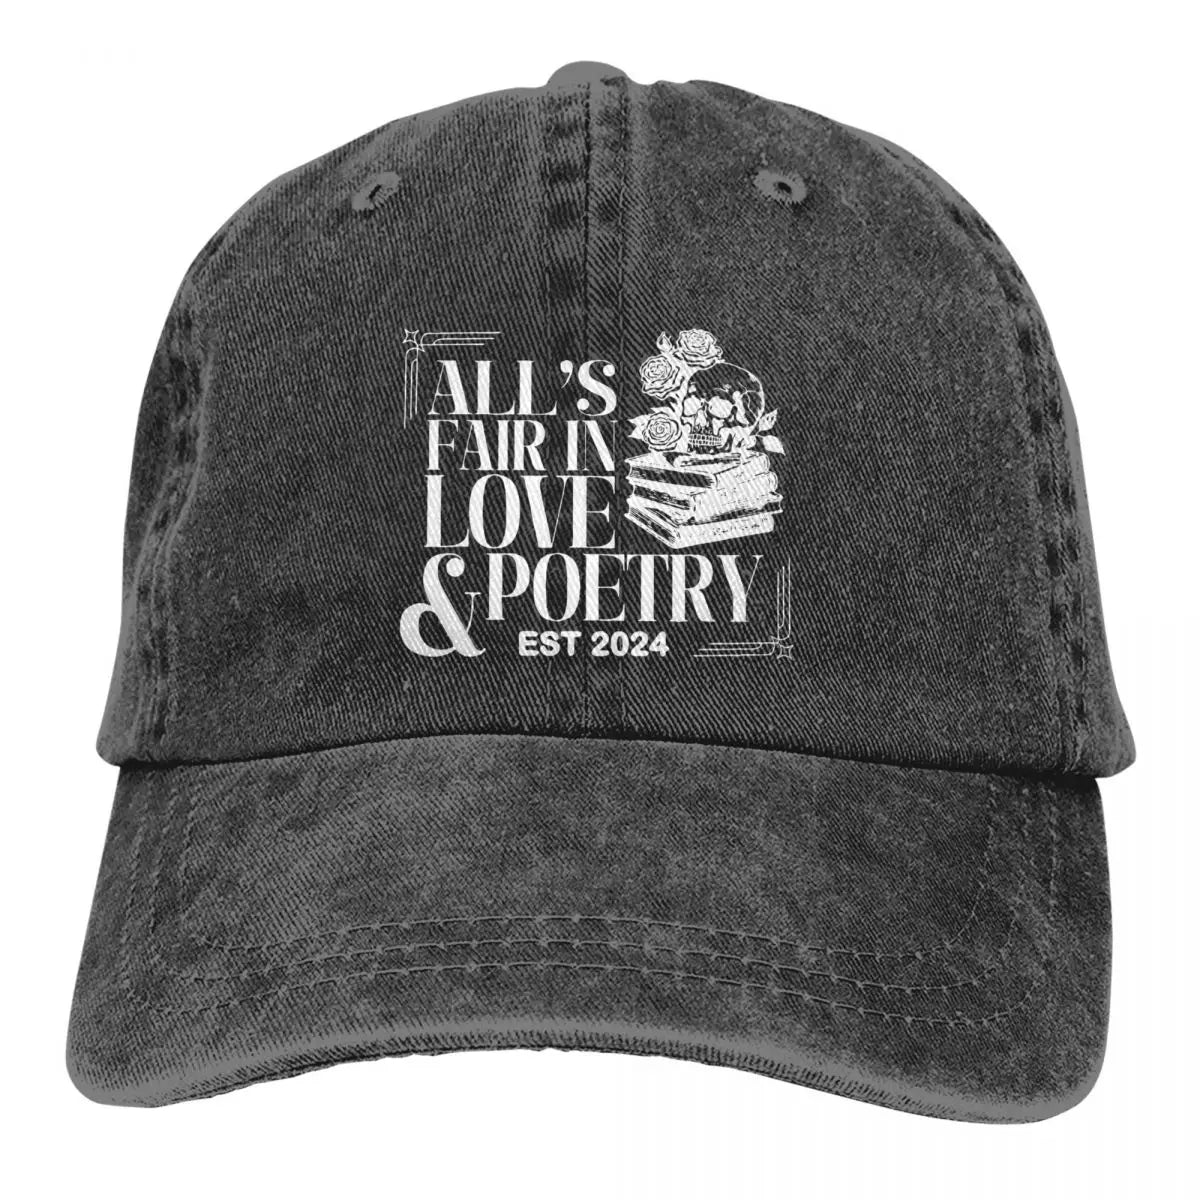 Baseball Cap All's Fair In Love & Poetry Unisex Distressed Denim The Tortured Poets Department Casquette Dad Hat Adjustable Fit